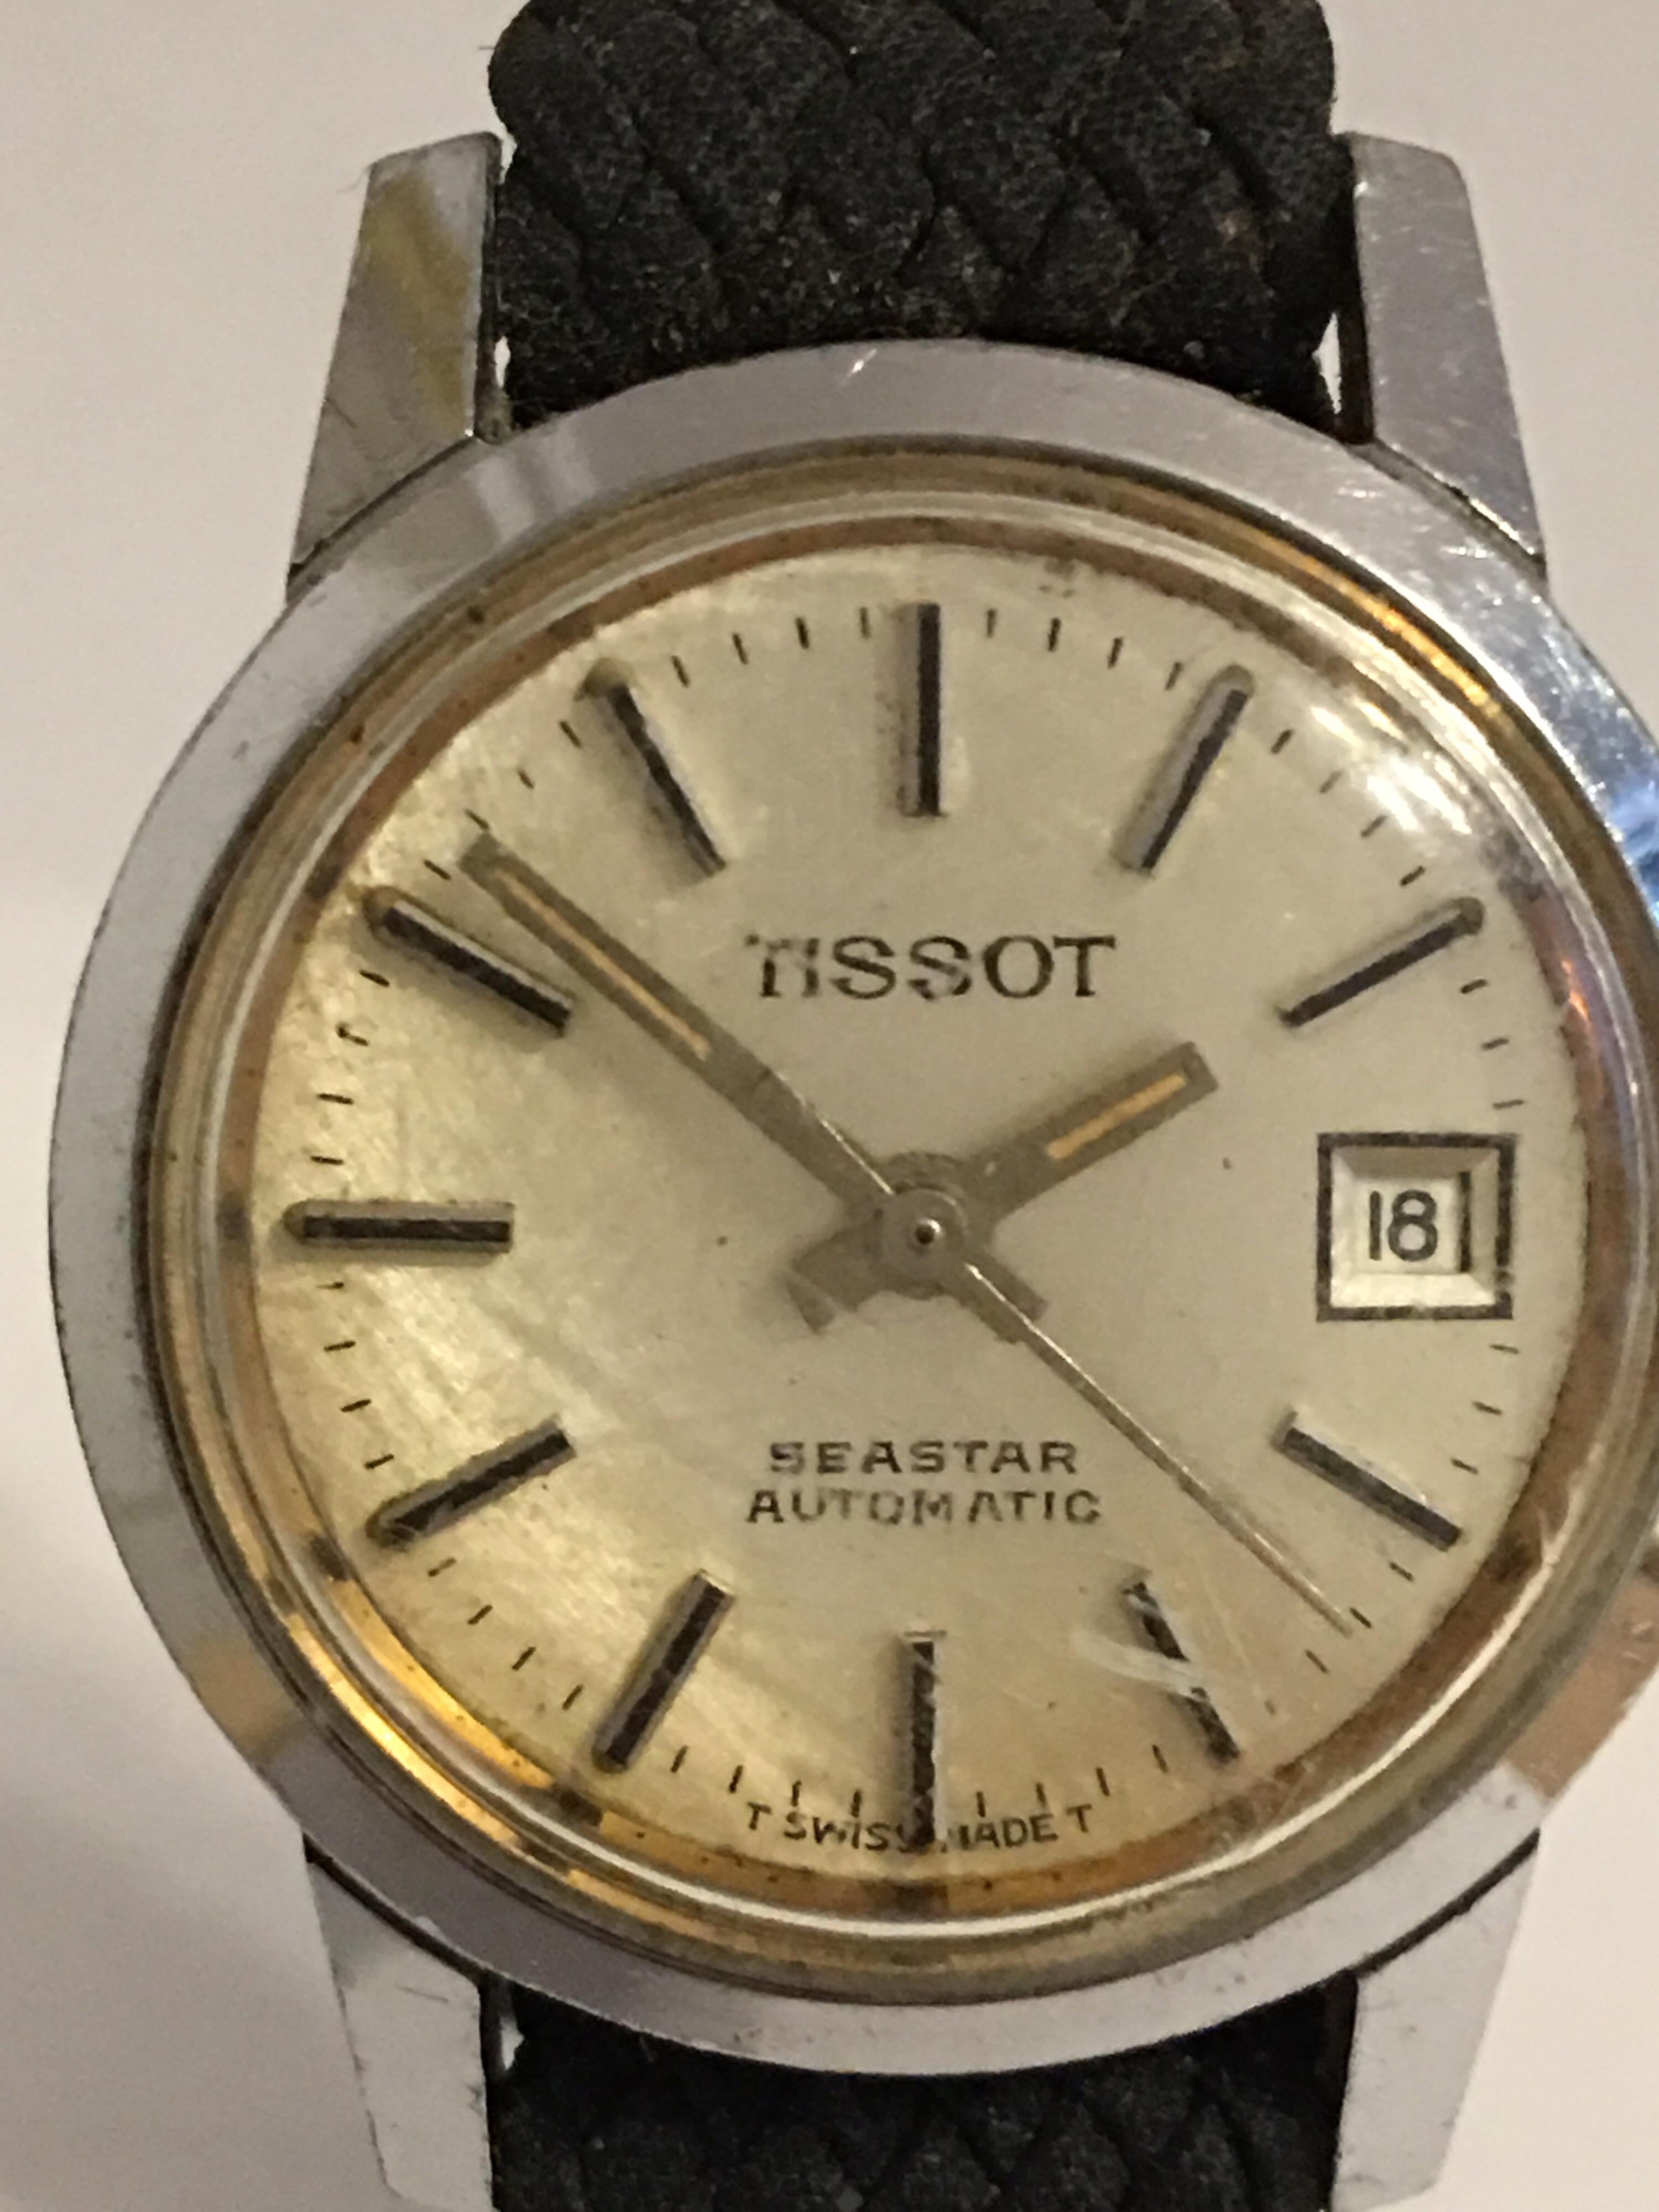 This vintage watch is working and running well. The silver plated case is a bit tarnished as shown. Visible scratches on the top glass.

Please study the images carefully as form part of the description.
